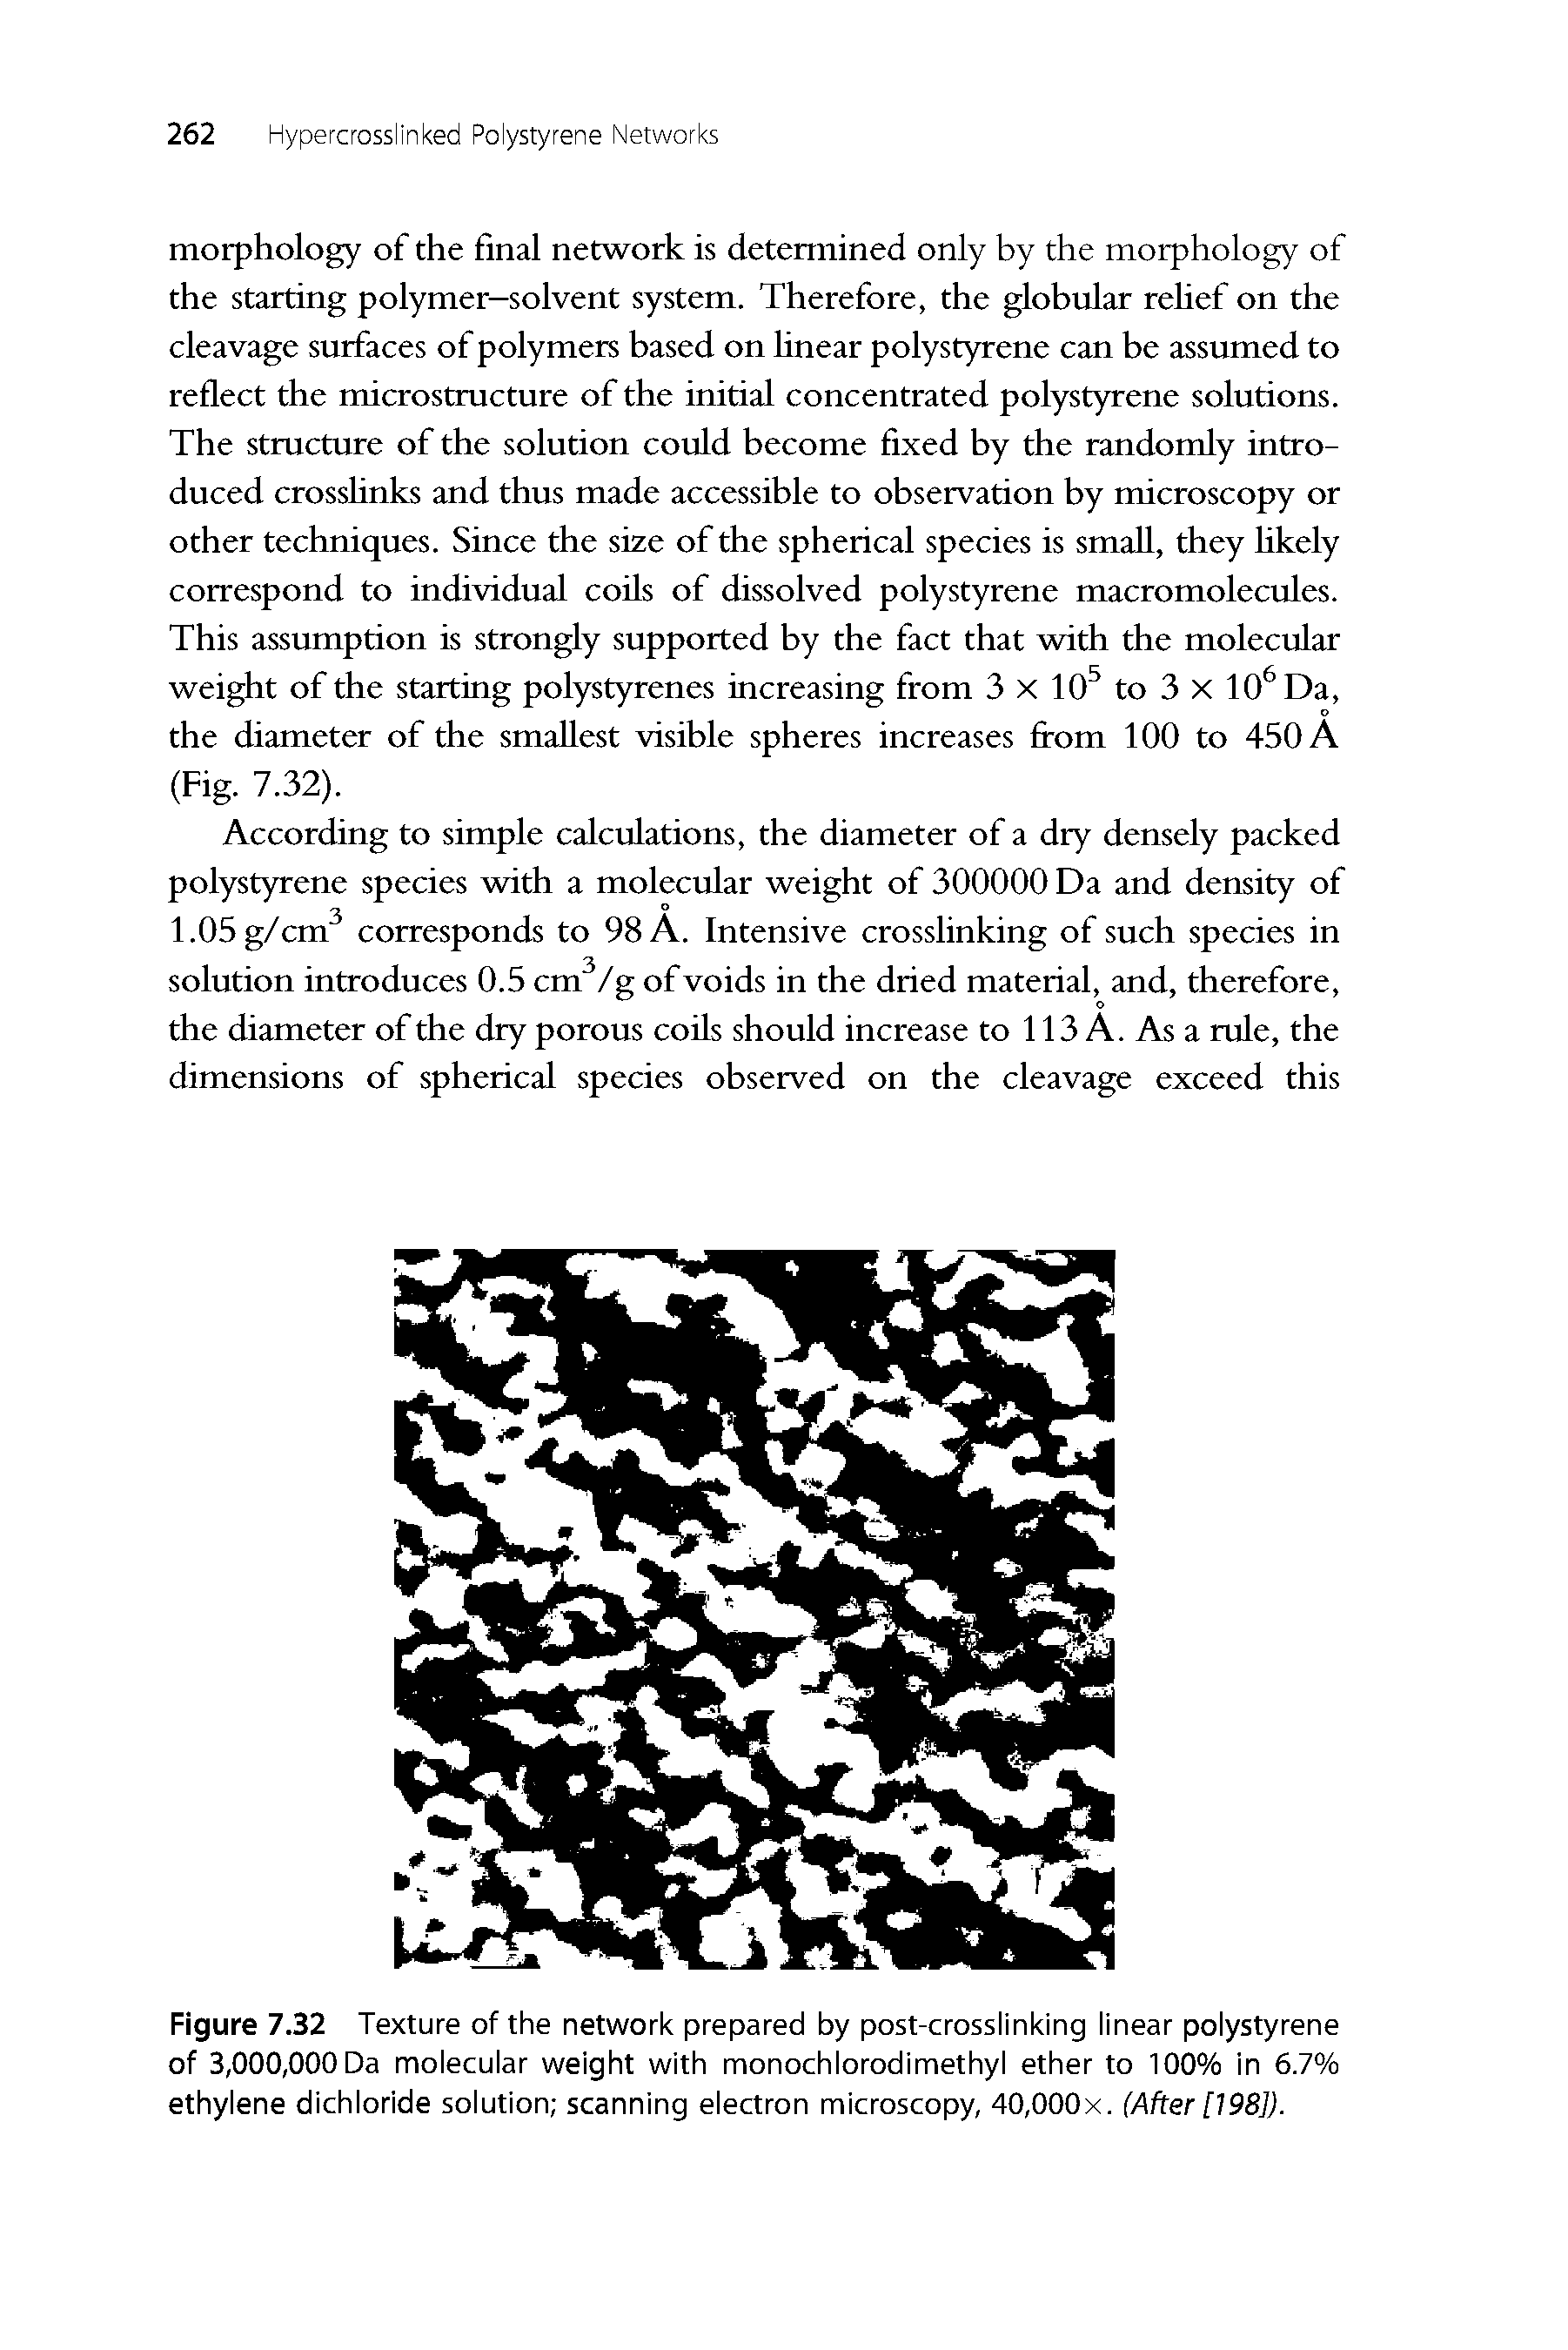 Figure 7.32 Texture of the network prepared by post-crosslinking linear polystyrene of 3,000,000 Da molecular weight with monochlorodimethyl ether to 100% in 6.7% ethylene dichloride solution scanning electron microscopy, 40,000x. (After [198]).